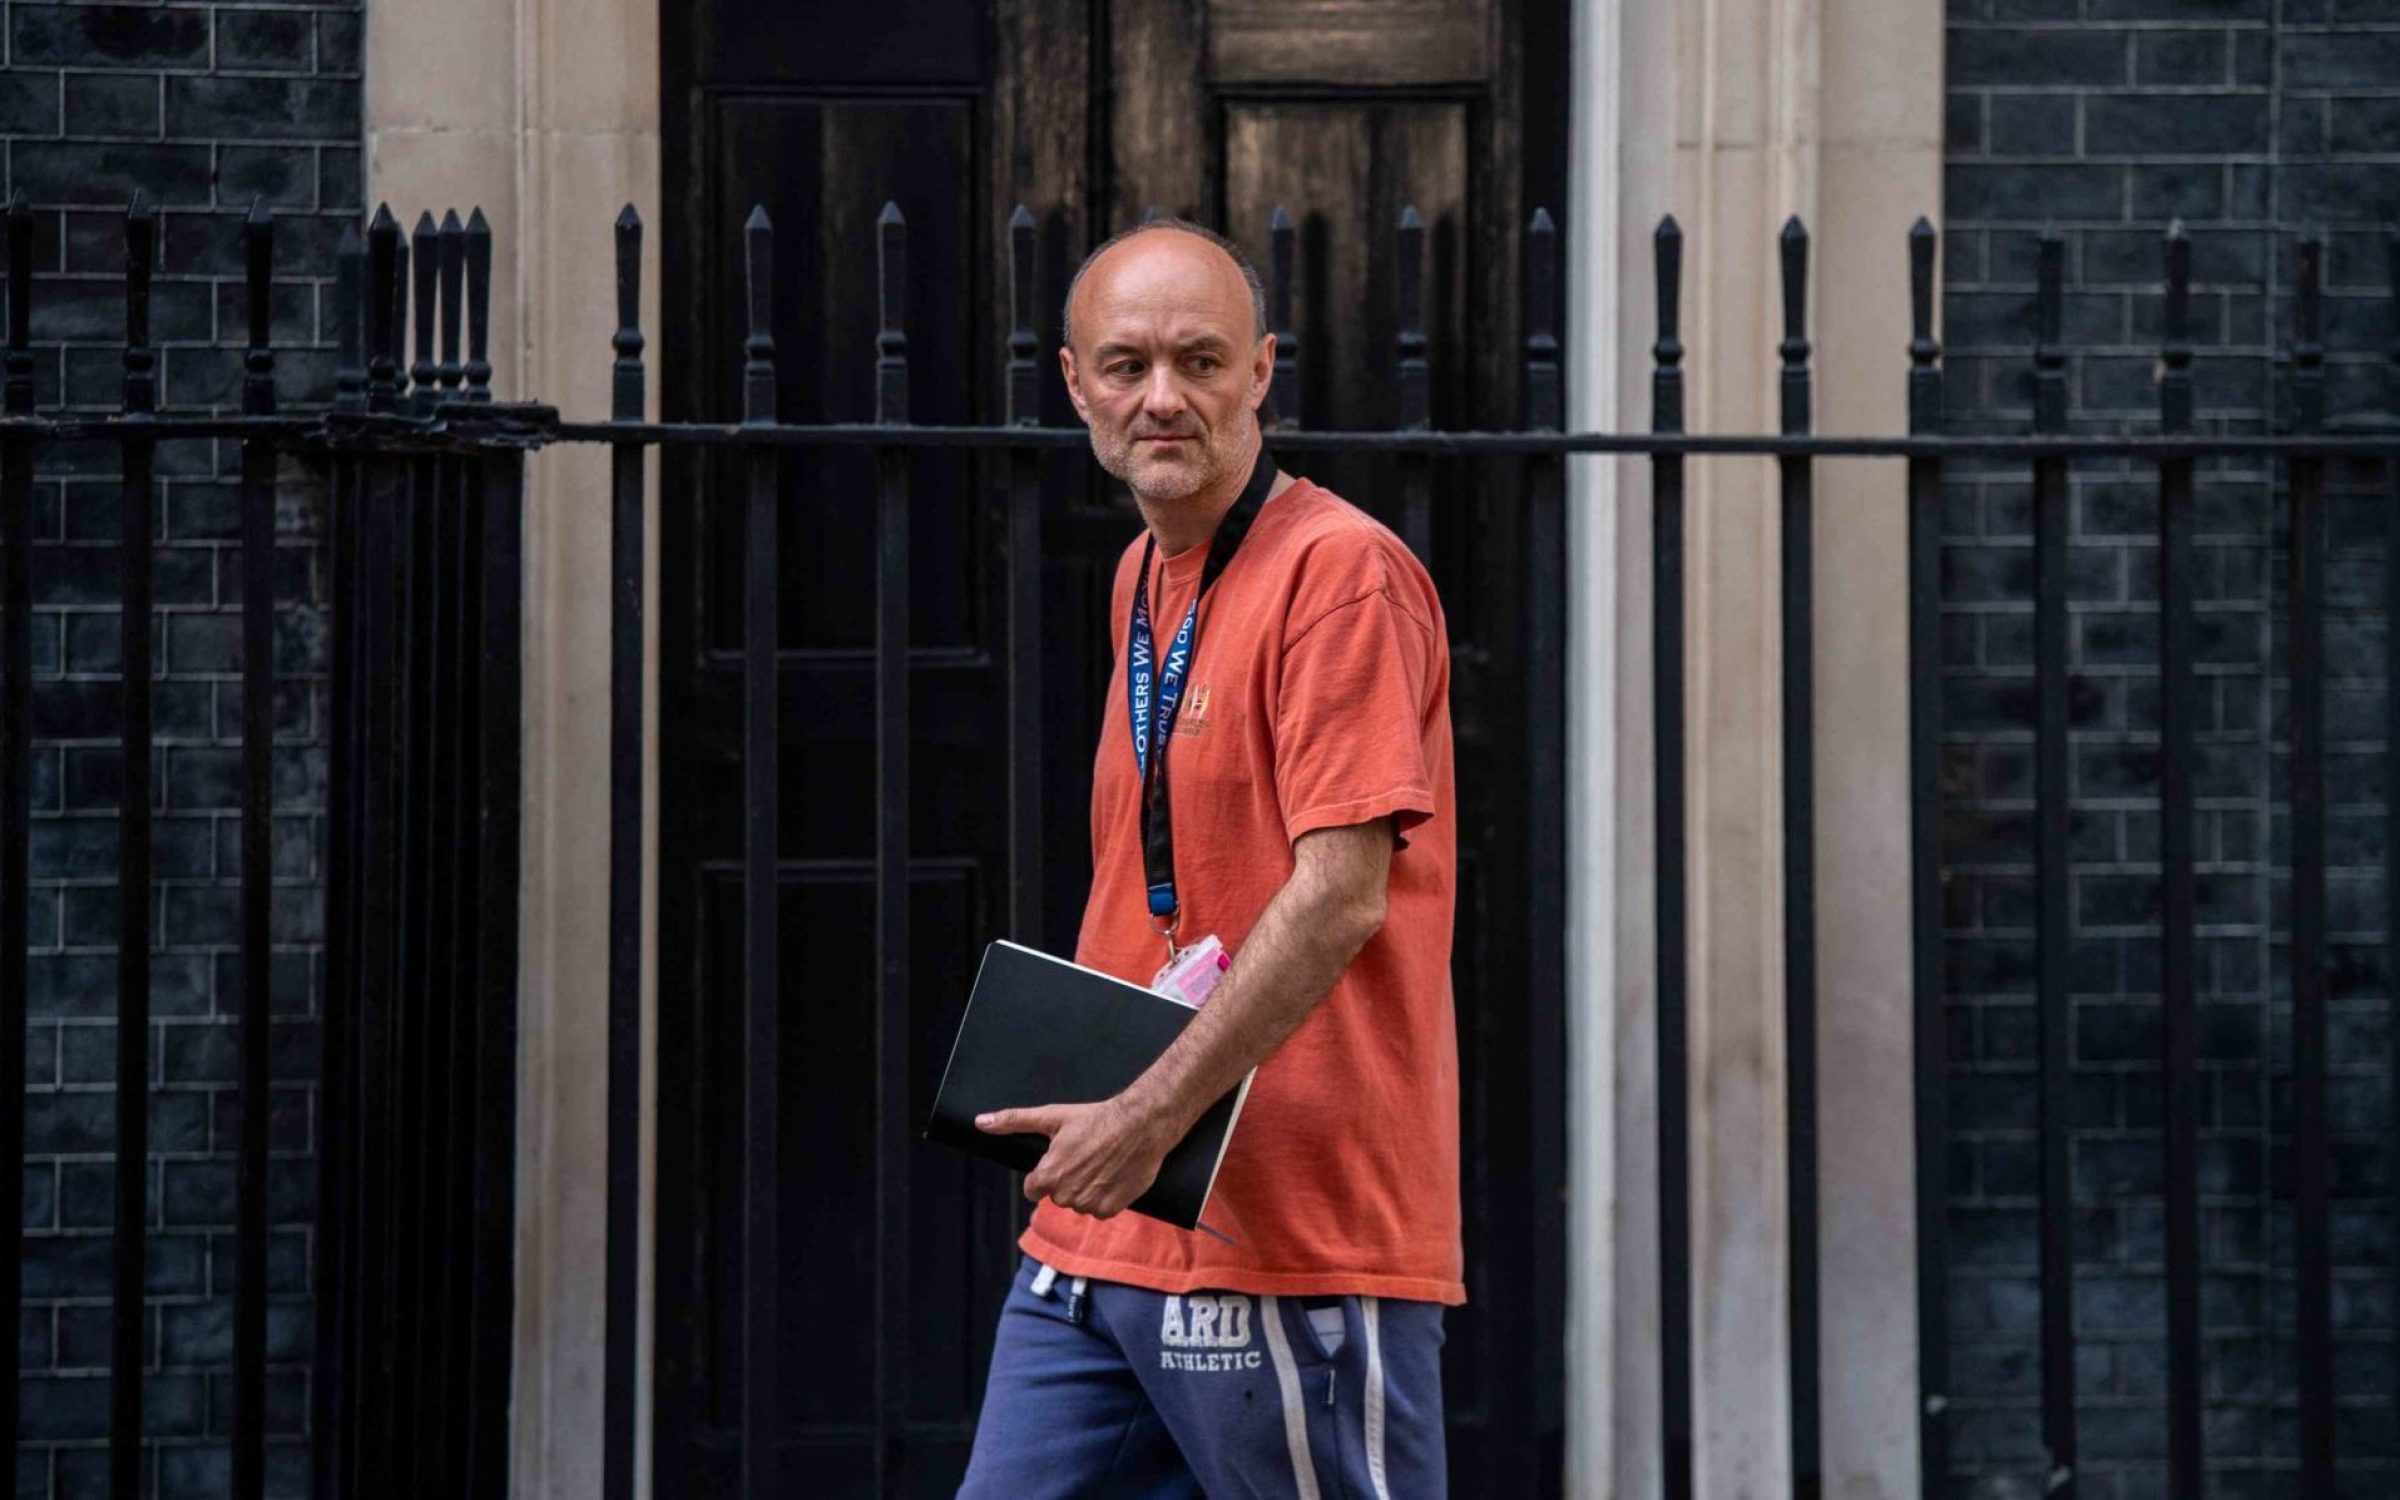 Dominic Cummings, special adviser to the prime minister, leaves 10 Downing Street on May 24, 2020